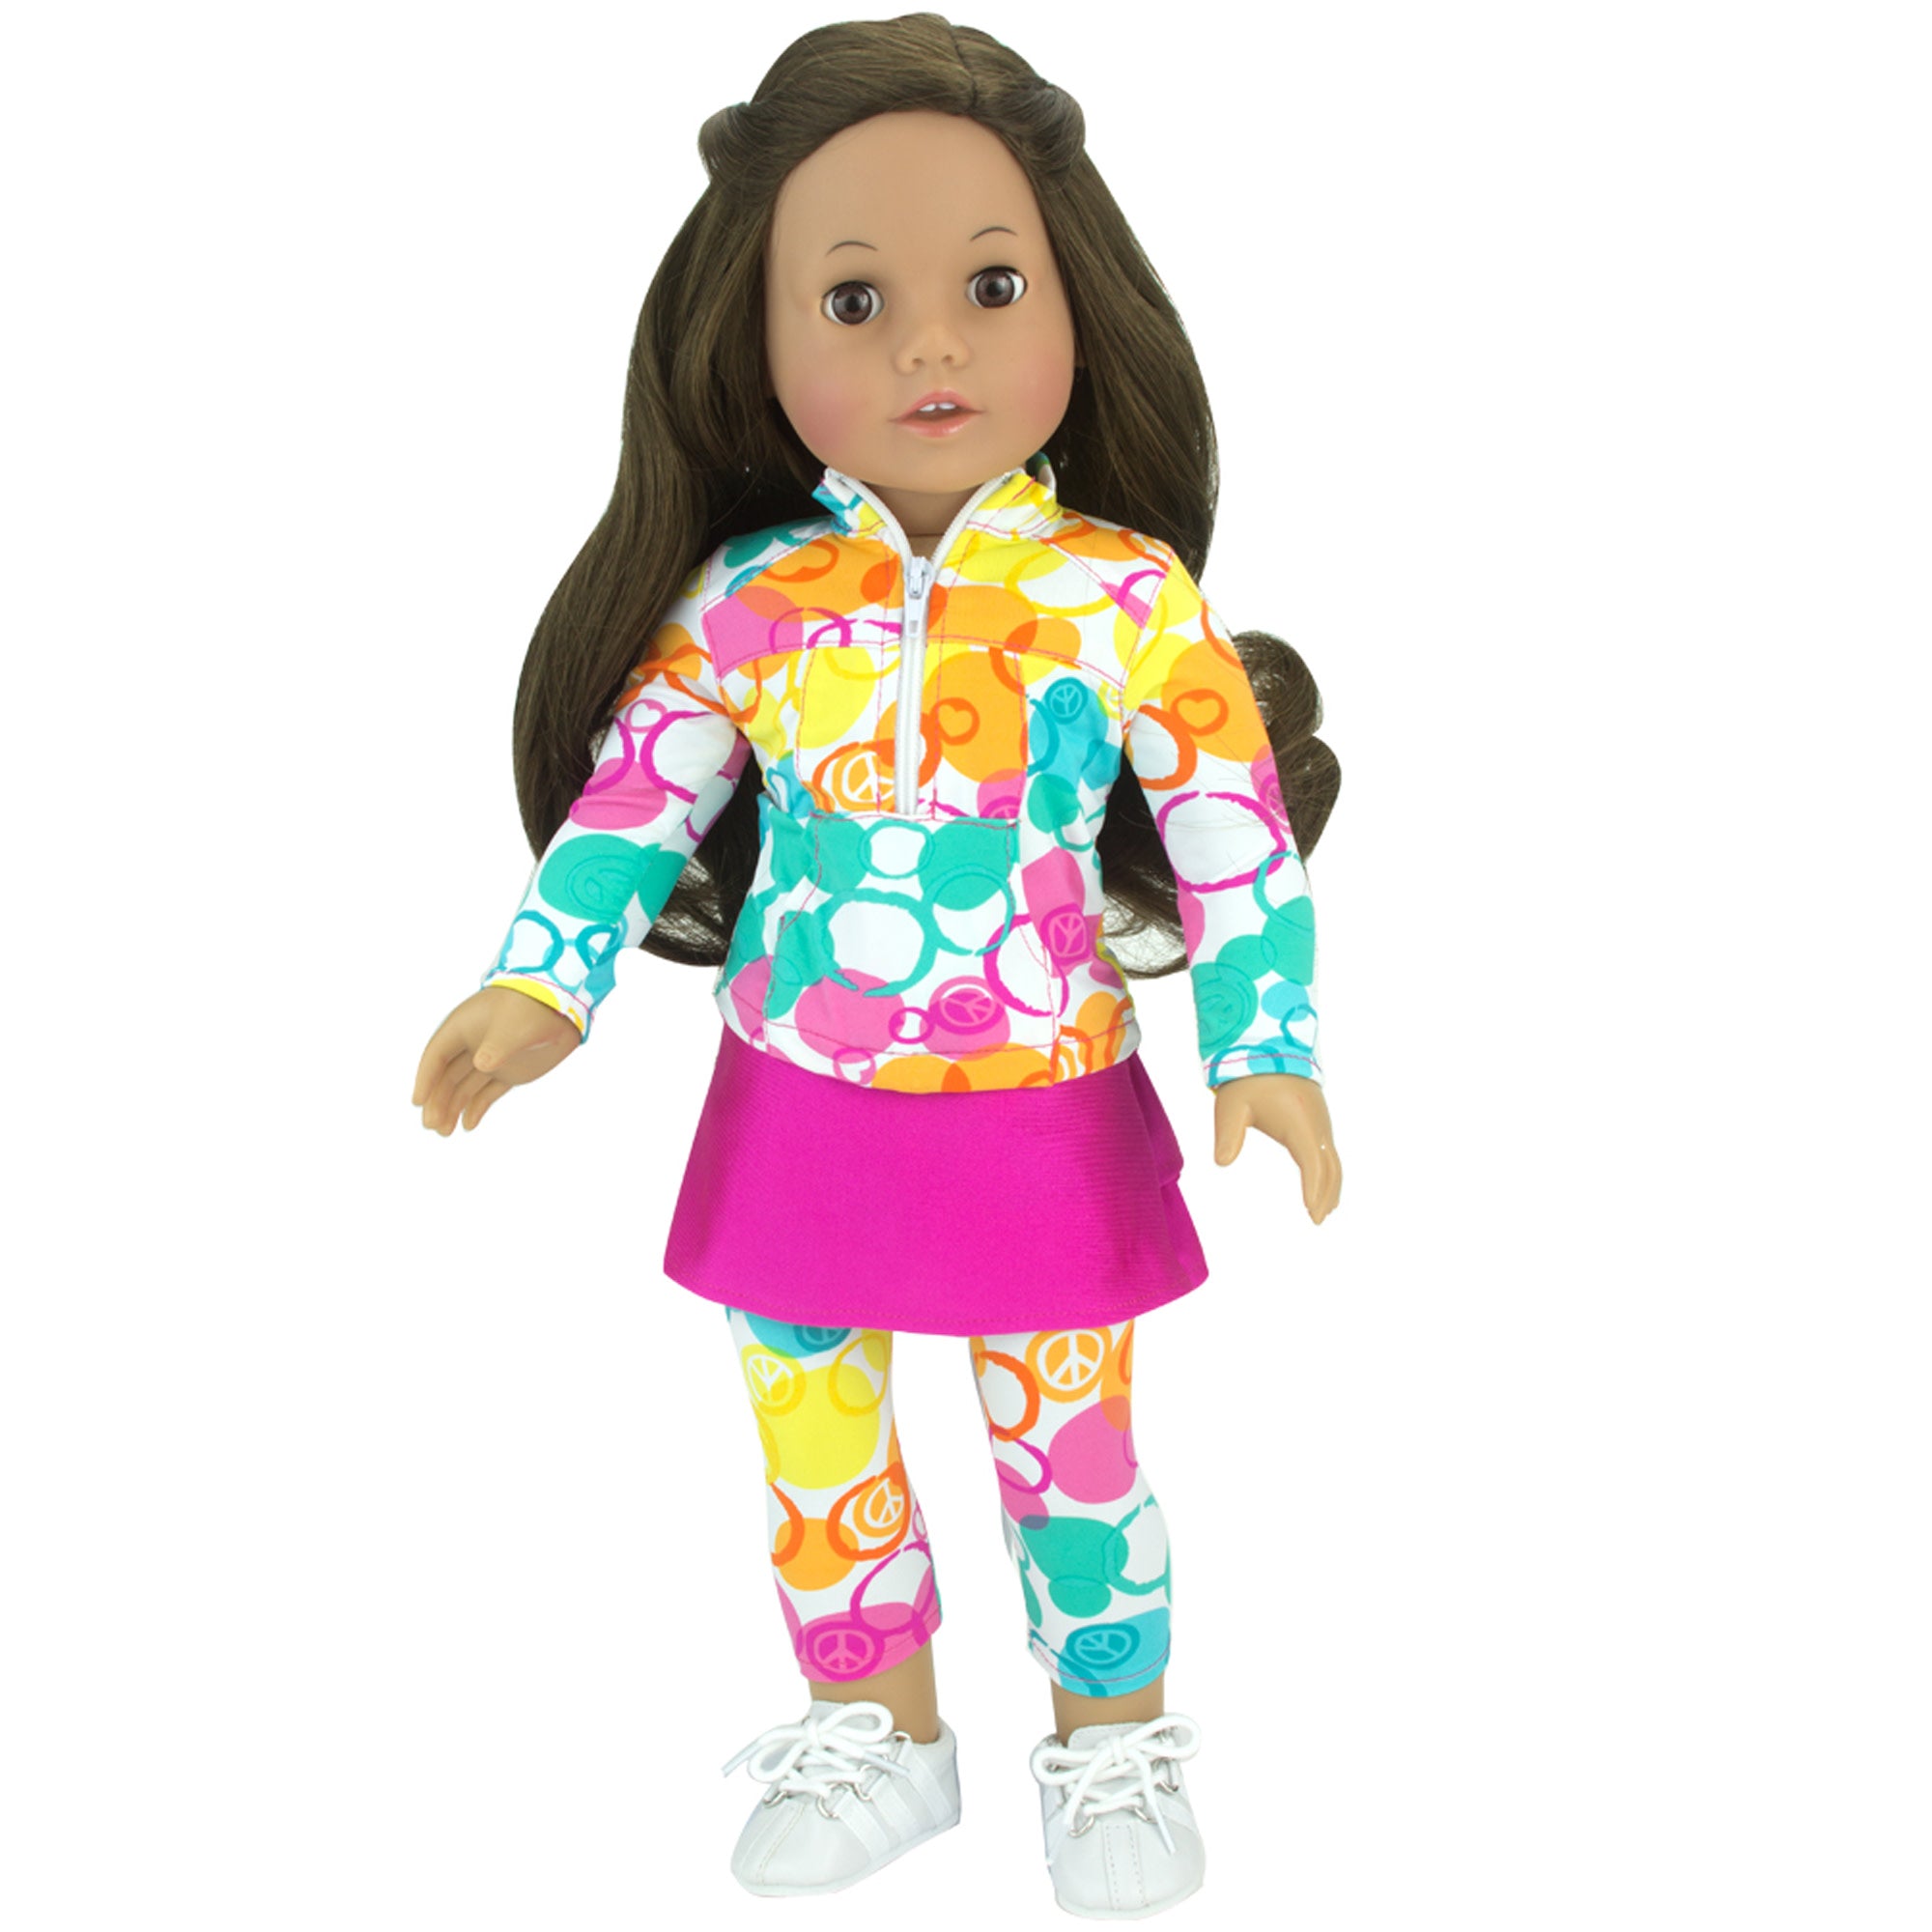 Sophia’s Two-Piece Complete Athletic Outfit with Leggings, Attached Ruffle Skirt, & 1/2 Zip-Up Long-Sleeve Shirt for 18” Dolls, Pink